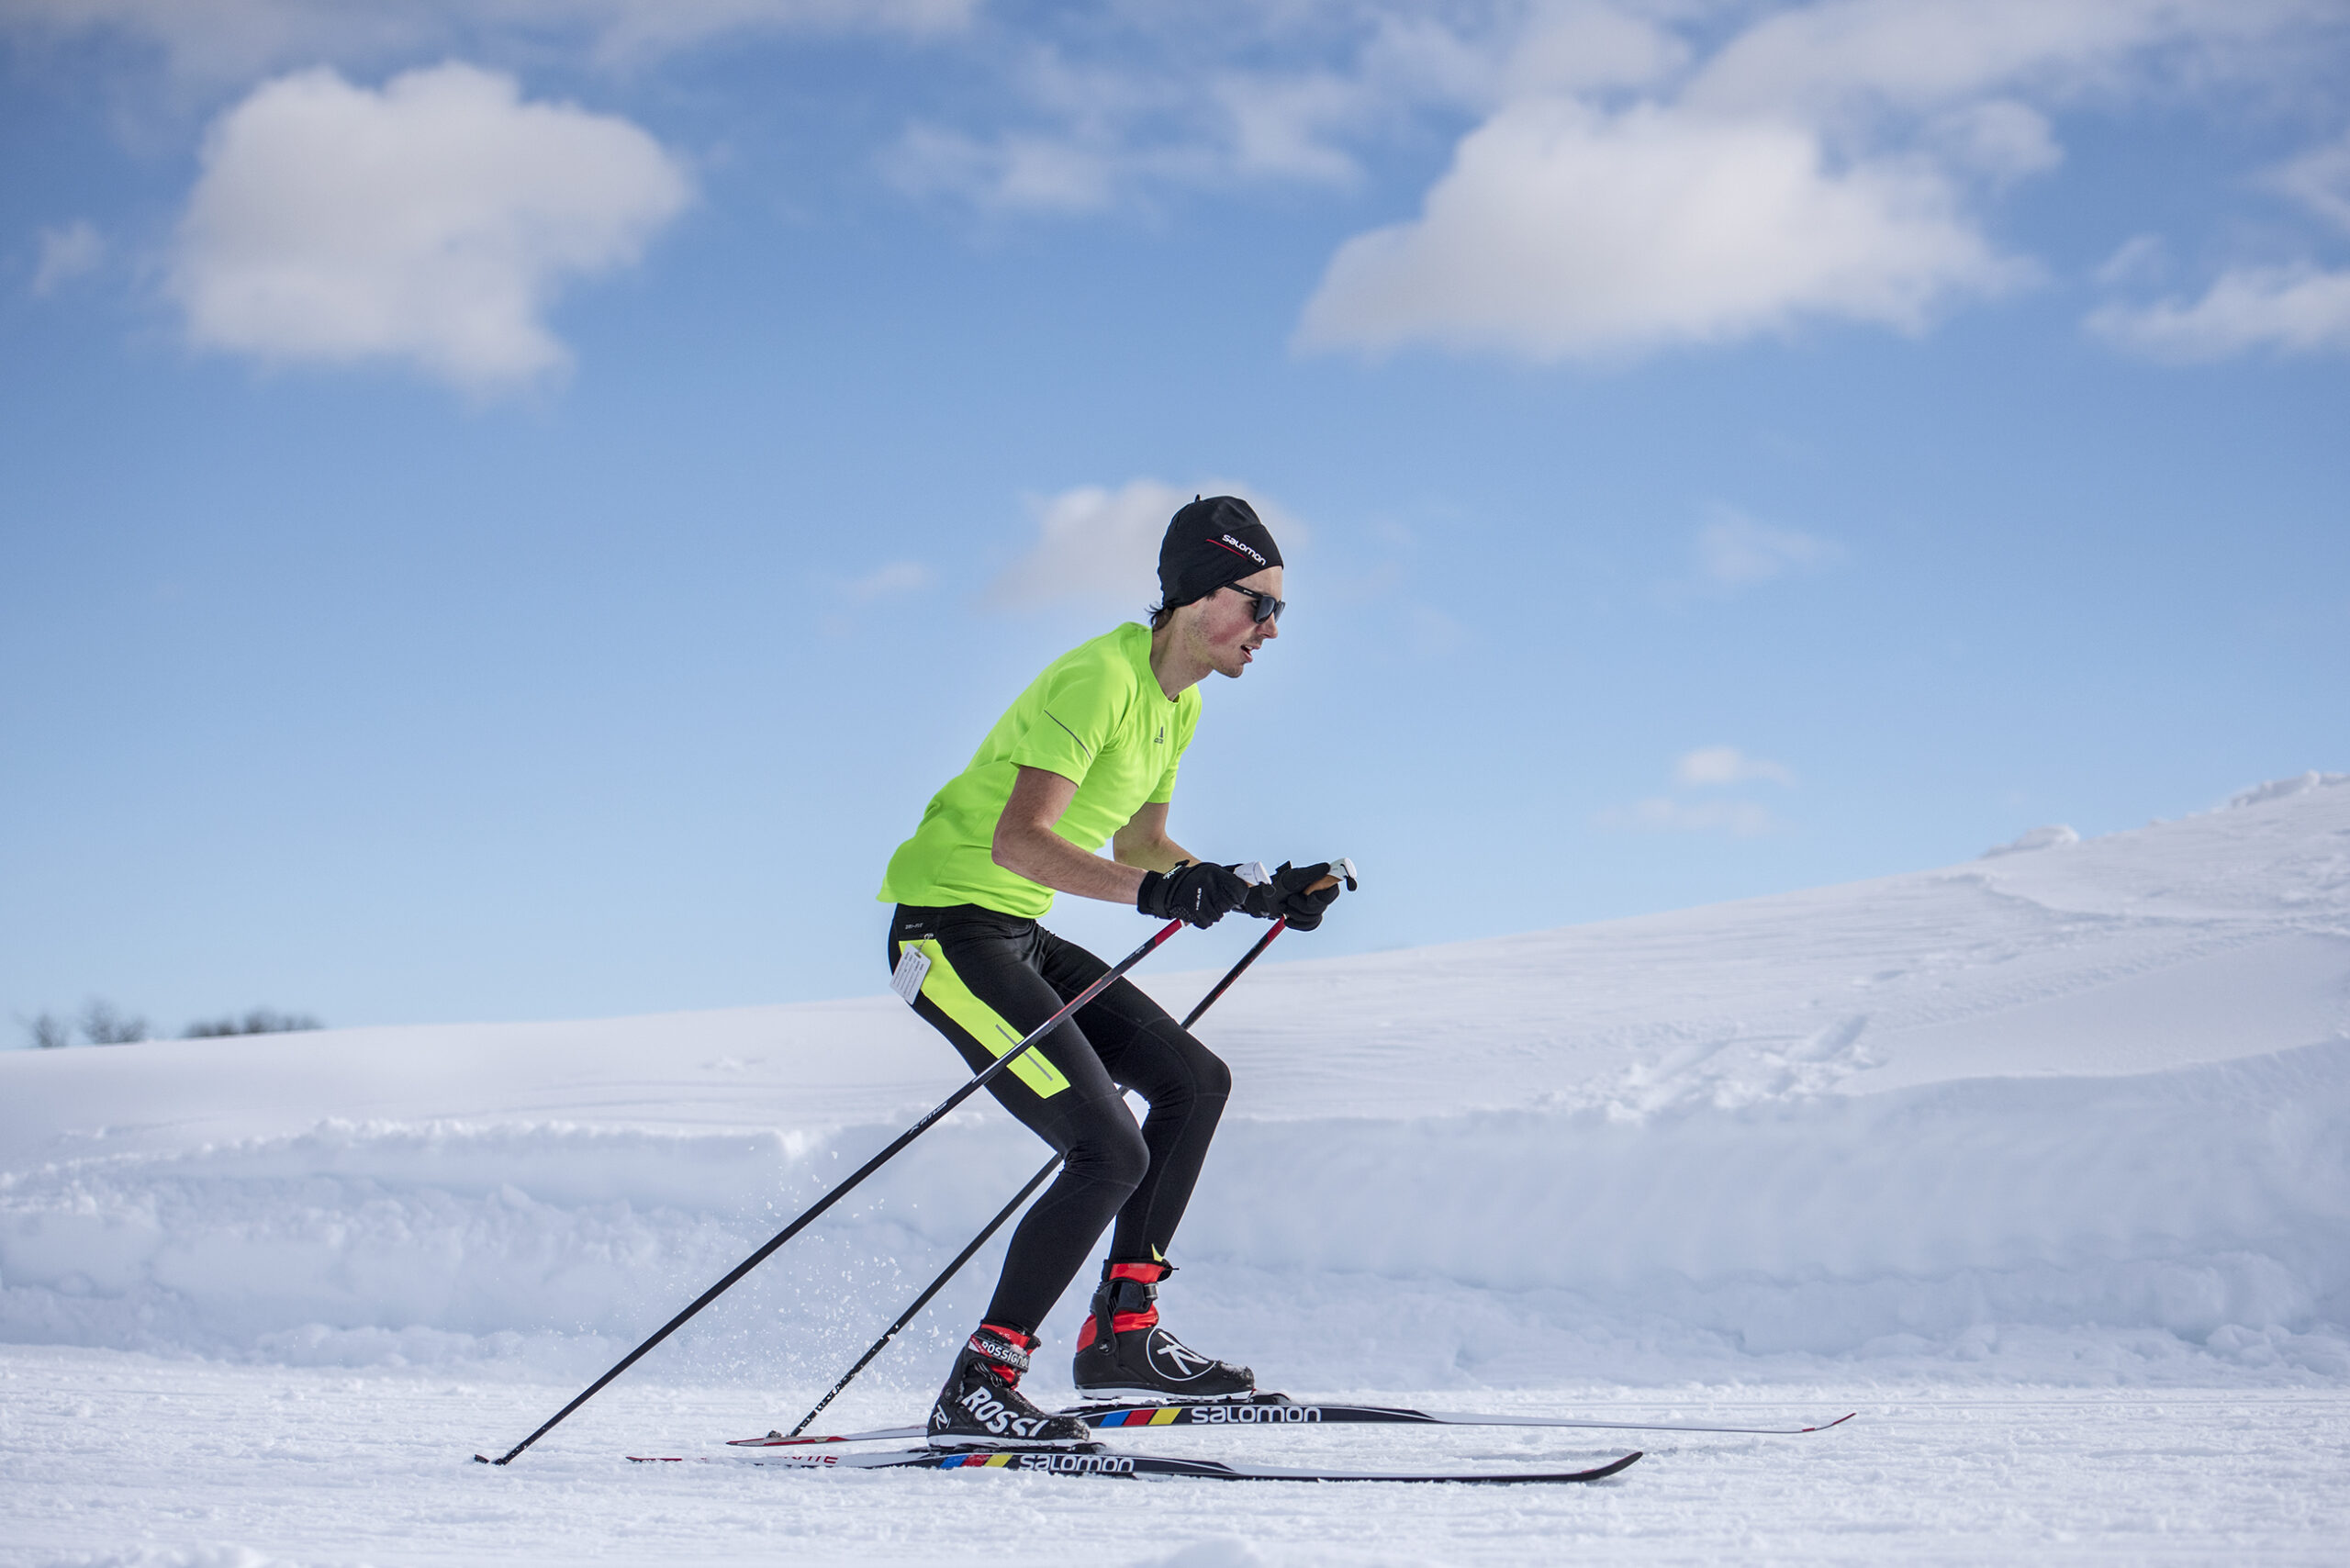 A man in a neon yellow short-sleeve shirt skis on white snow under a blue sky